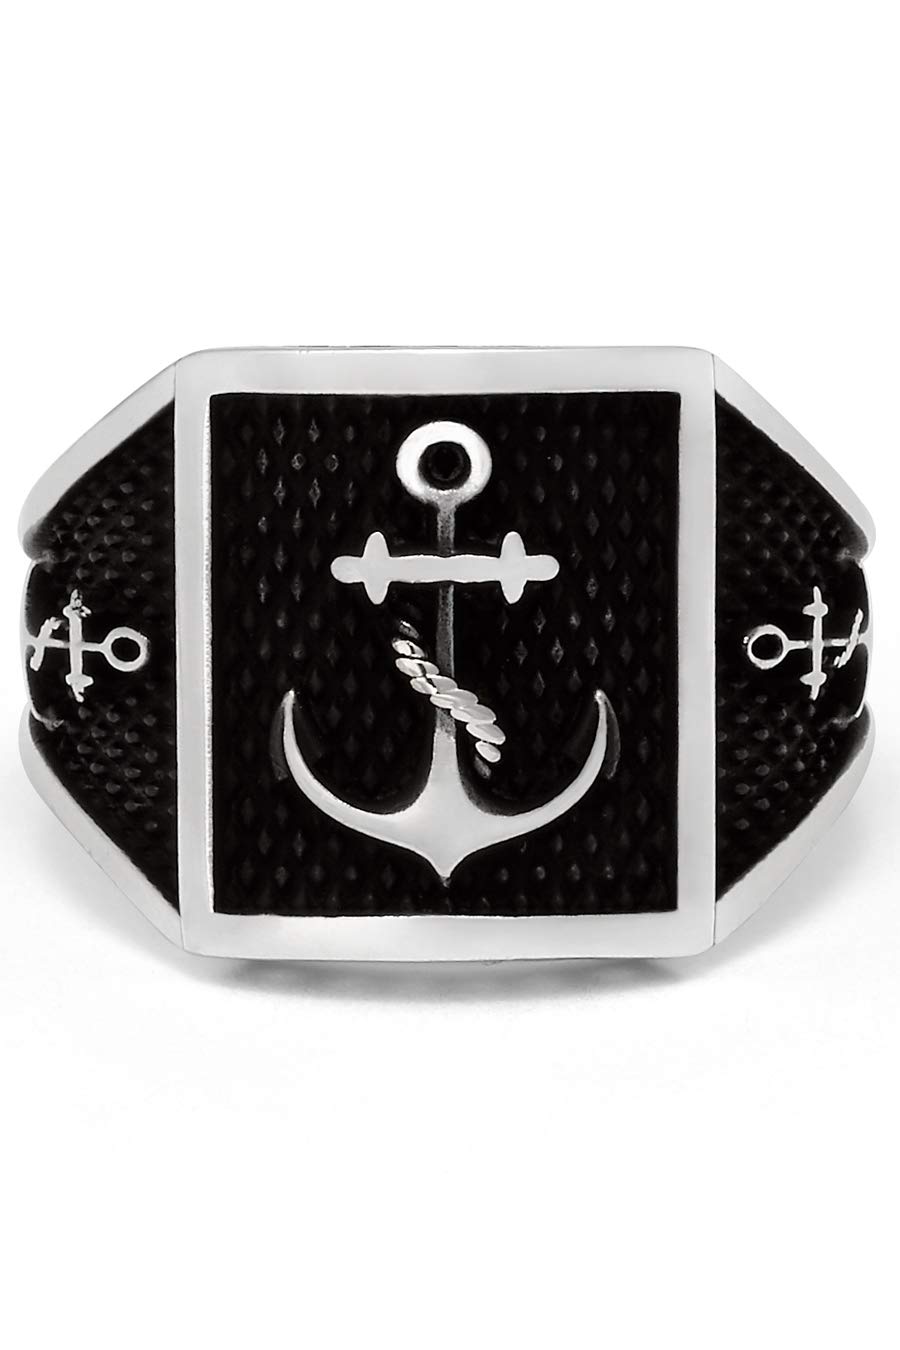 Metal Masters Co. Men's Nautical Anchor Sailing Ring Sterling Silver 925 Black Vintage Signet 16MM